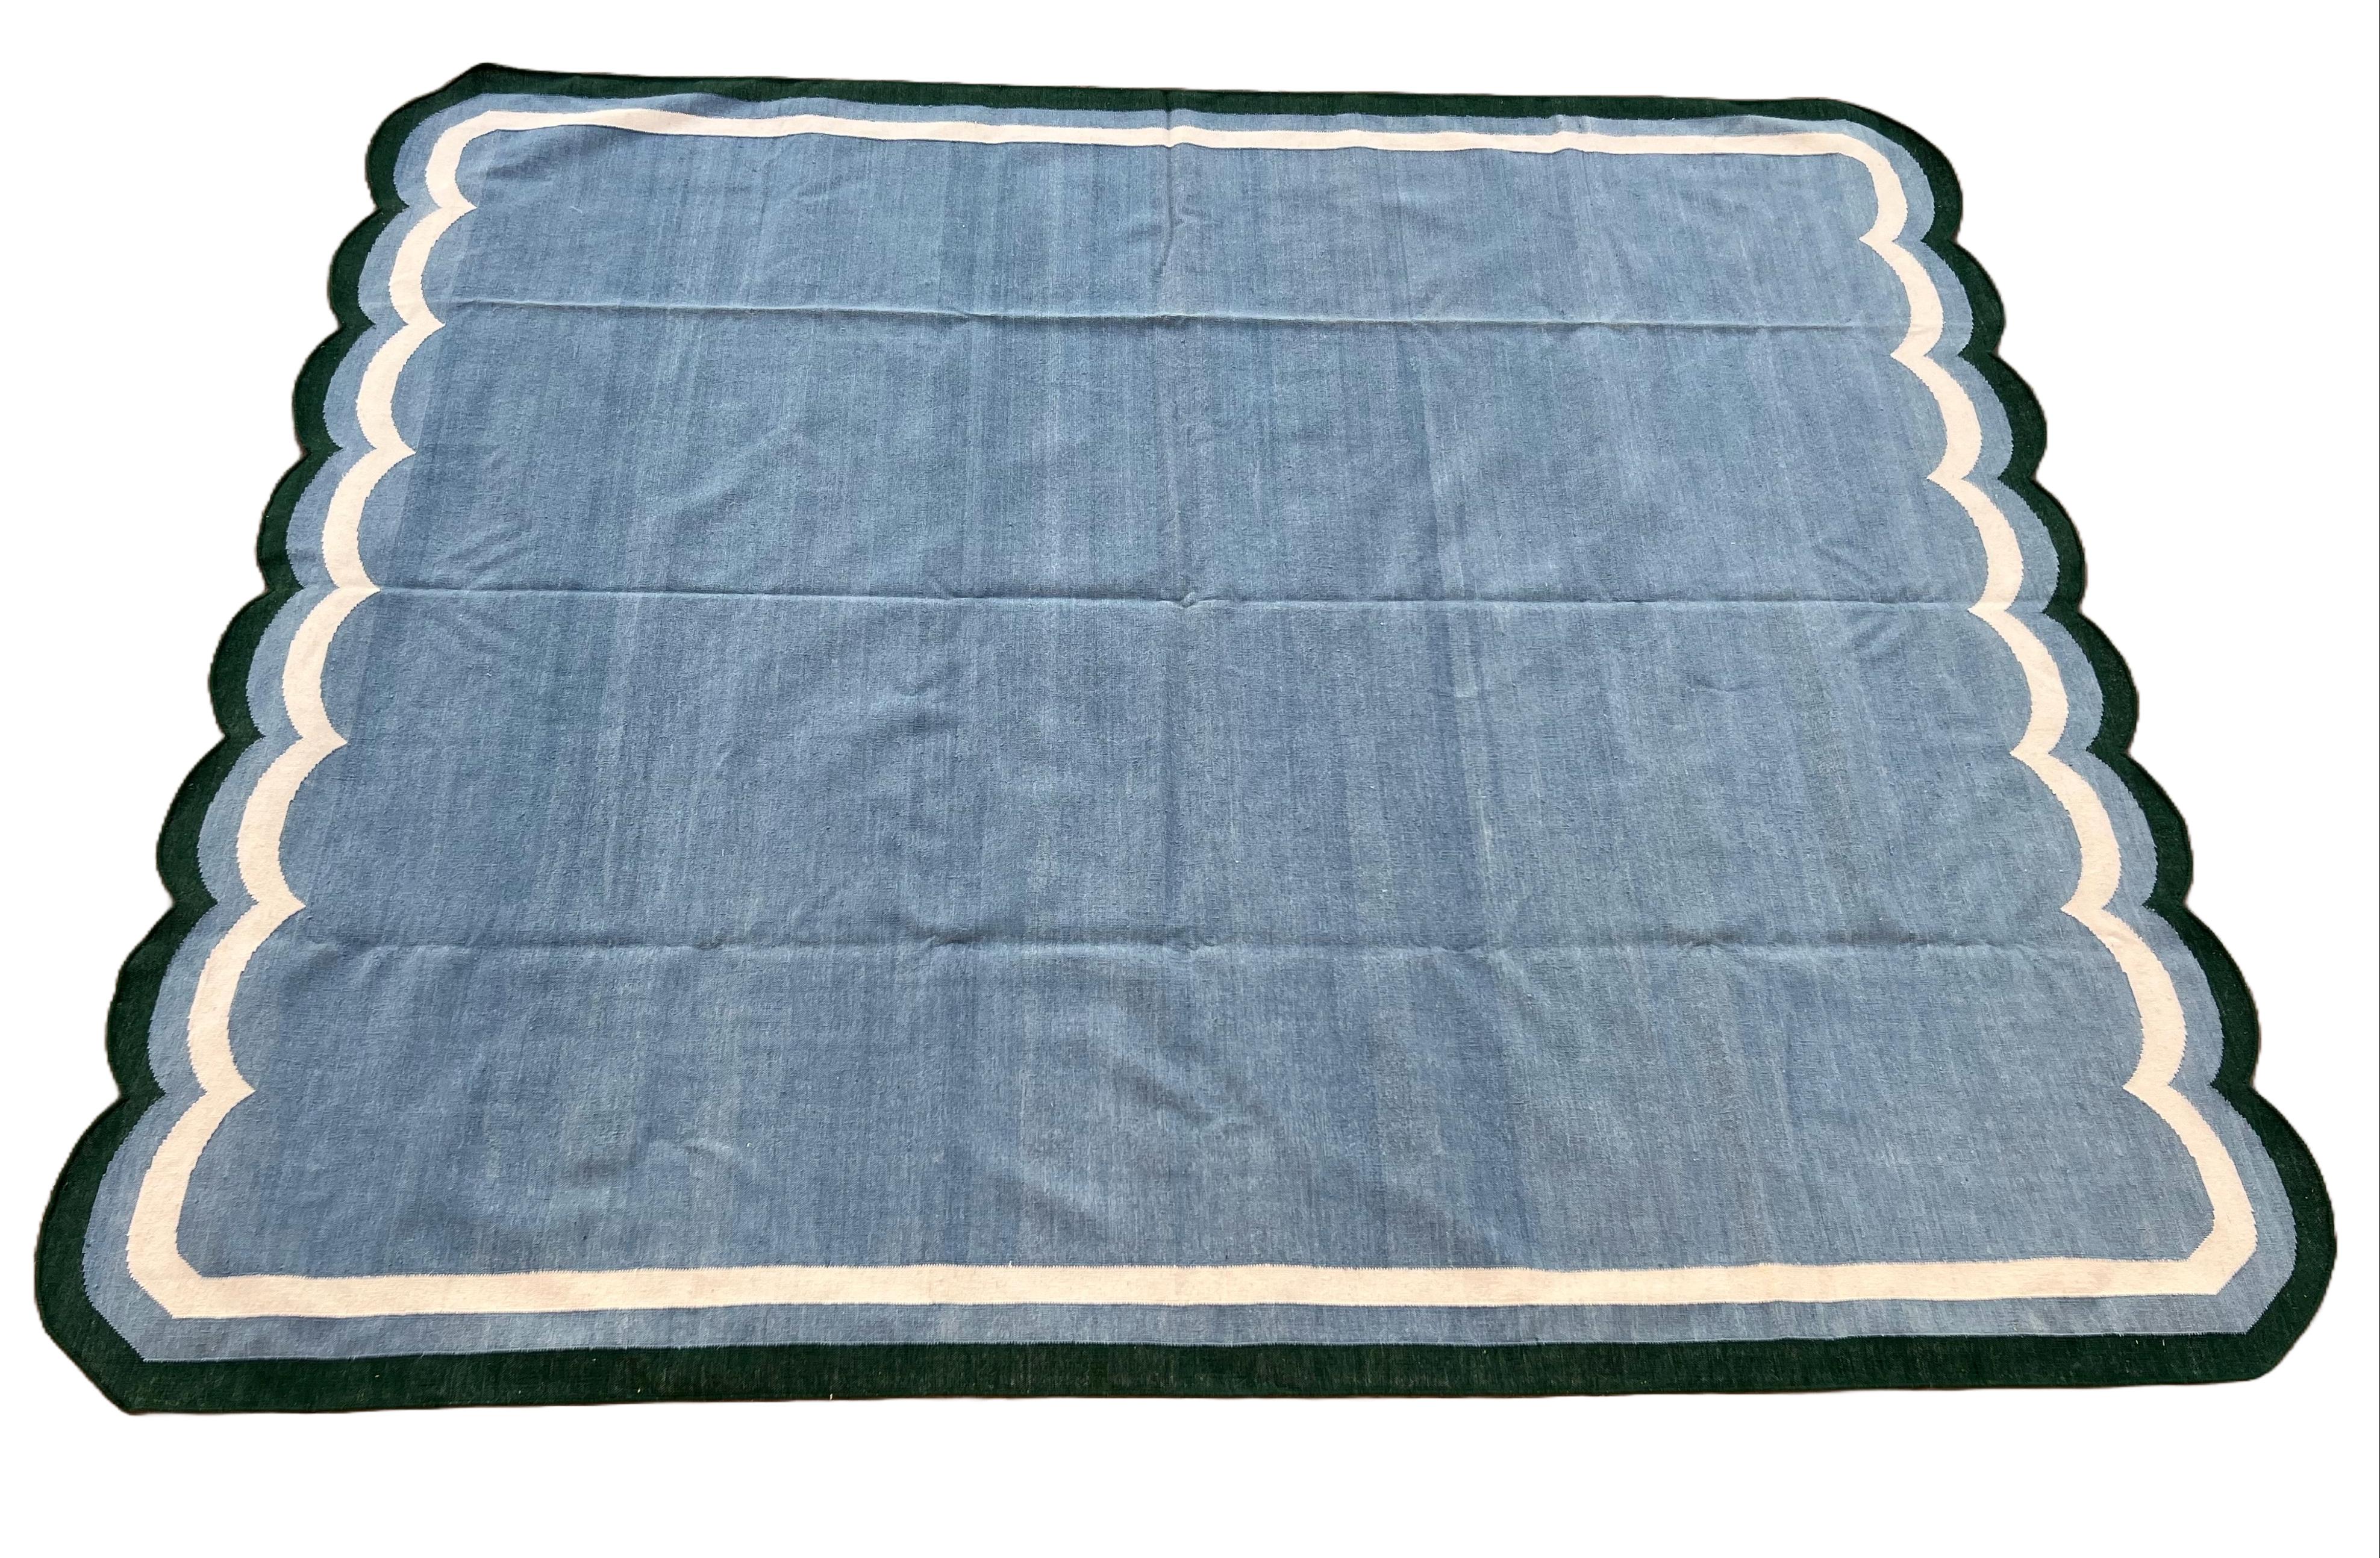 Mid-Century Modern Handmade Woolen Area Flat Weave Rug, 8x10 Blue And Green Scallop Indian Dhurrie For Sale